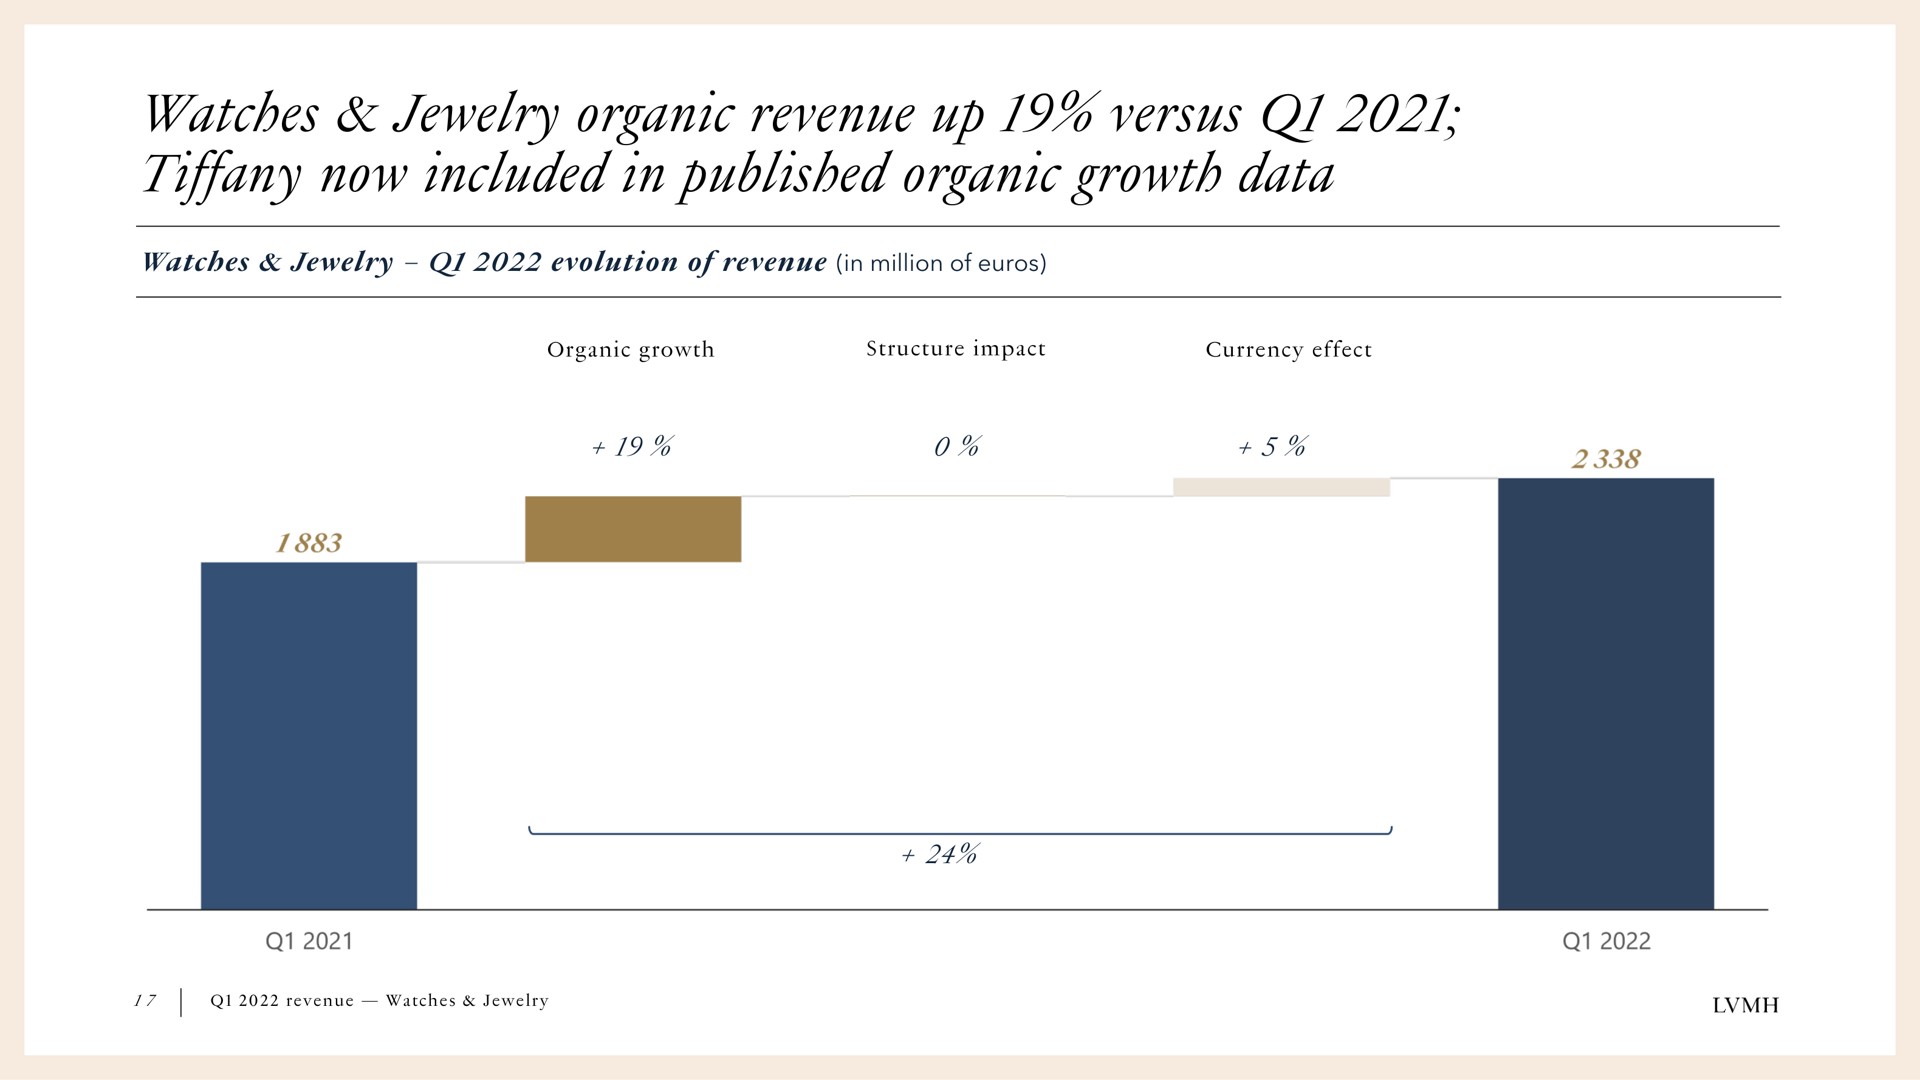 watches jewelry organic revenue up versus tiffany now included in published organic growth data | LVMH